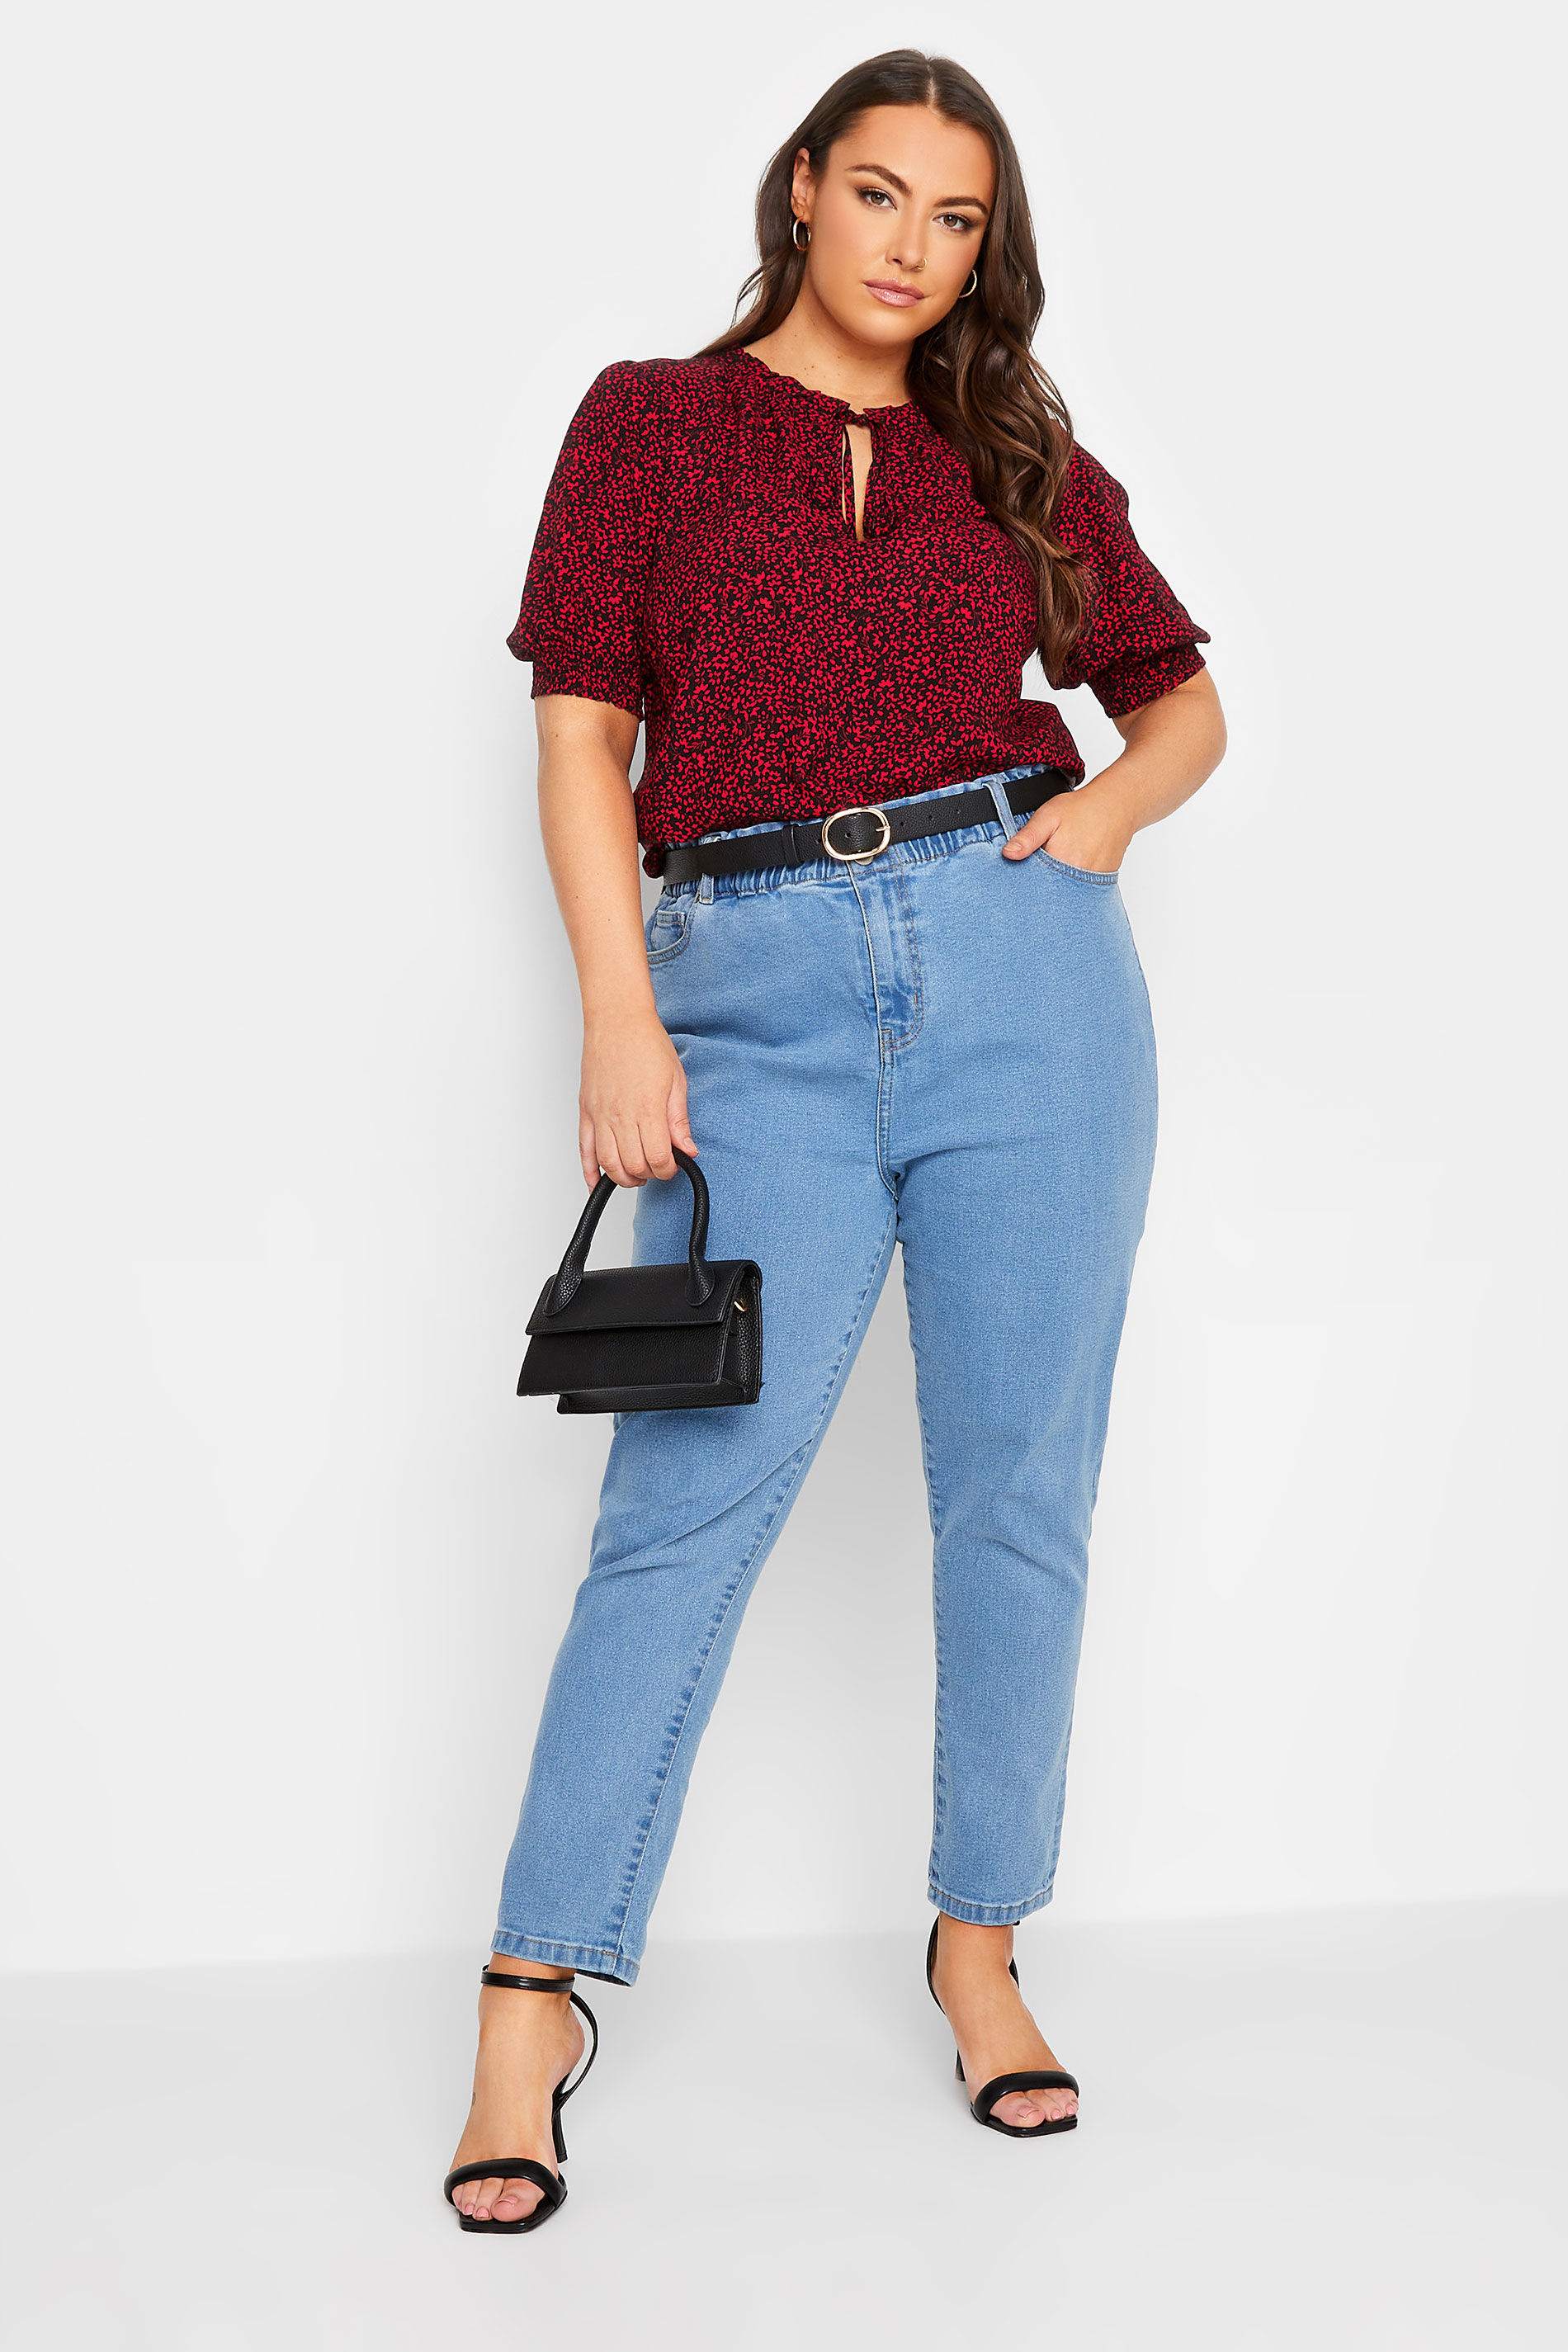 YOURS Plus Size Black & Red Floral Print Tie Neck Blouse | Yours Clothing 2